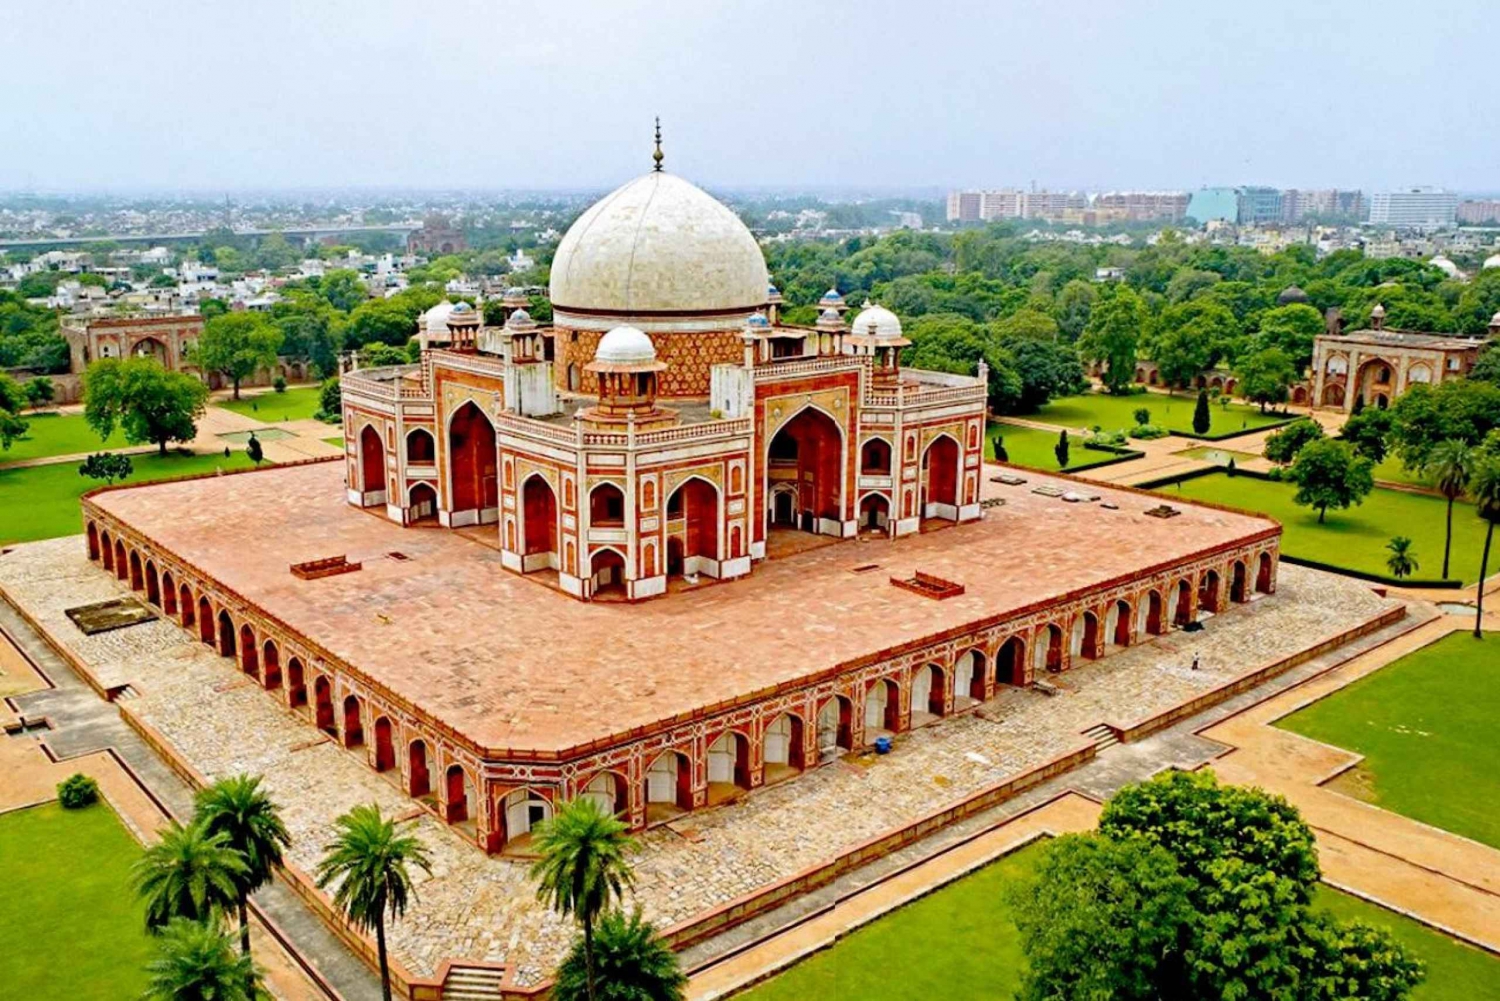 5-Day Private Golden Triangle Tour: Delhi, Agra, and Jaipur